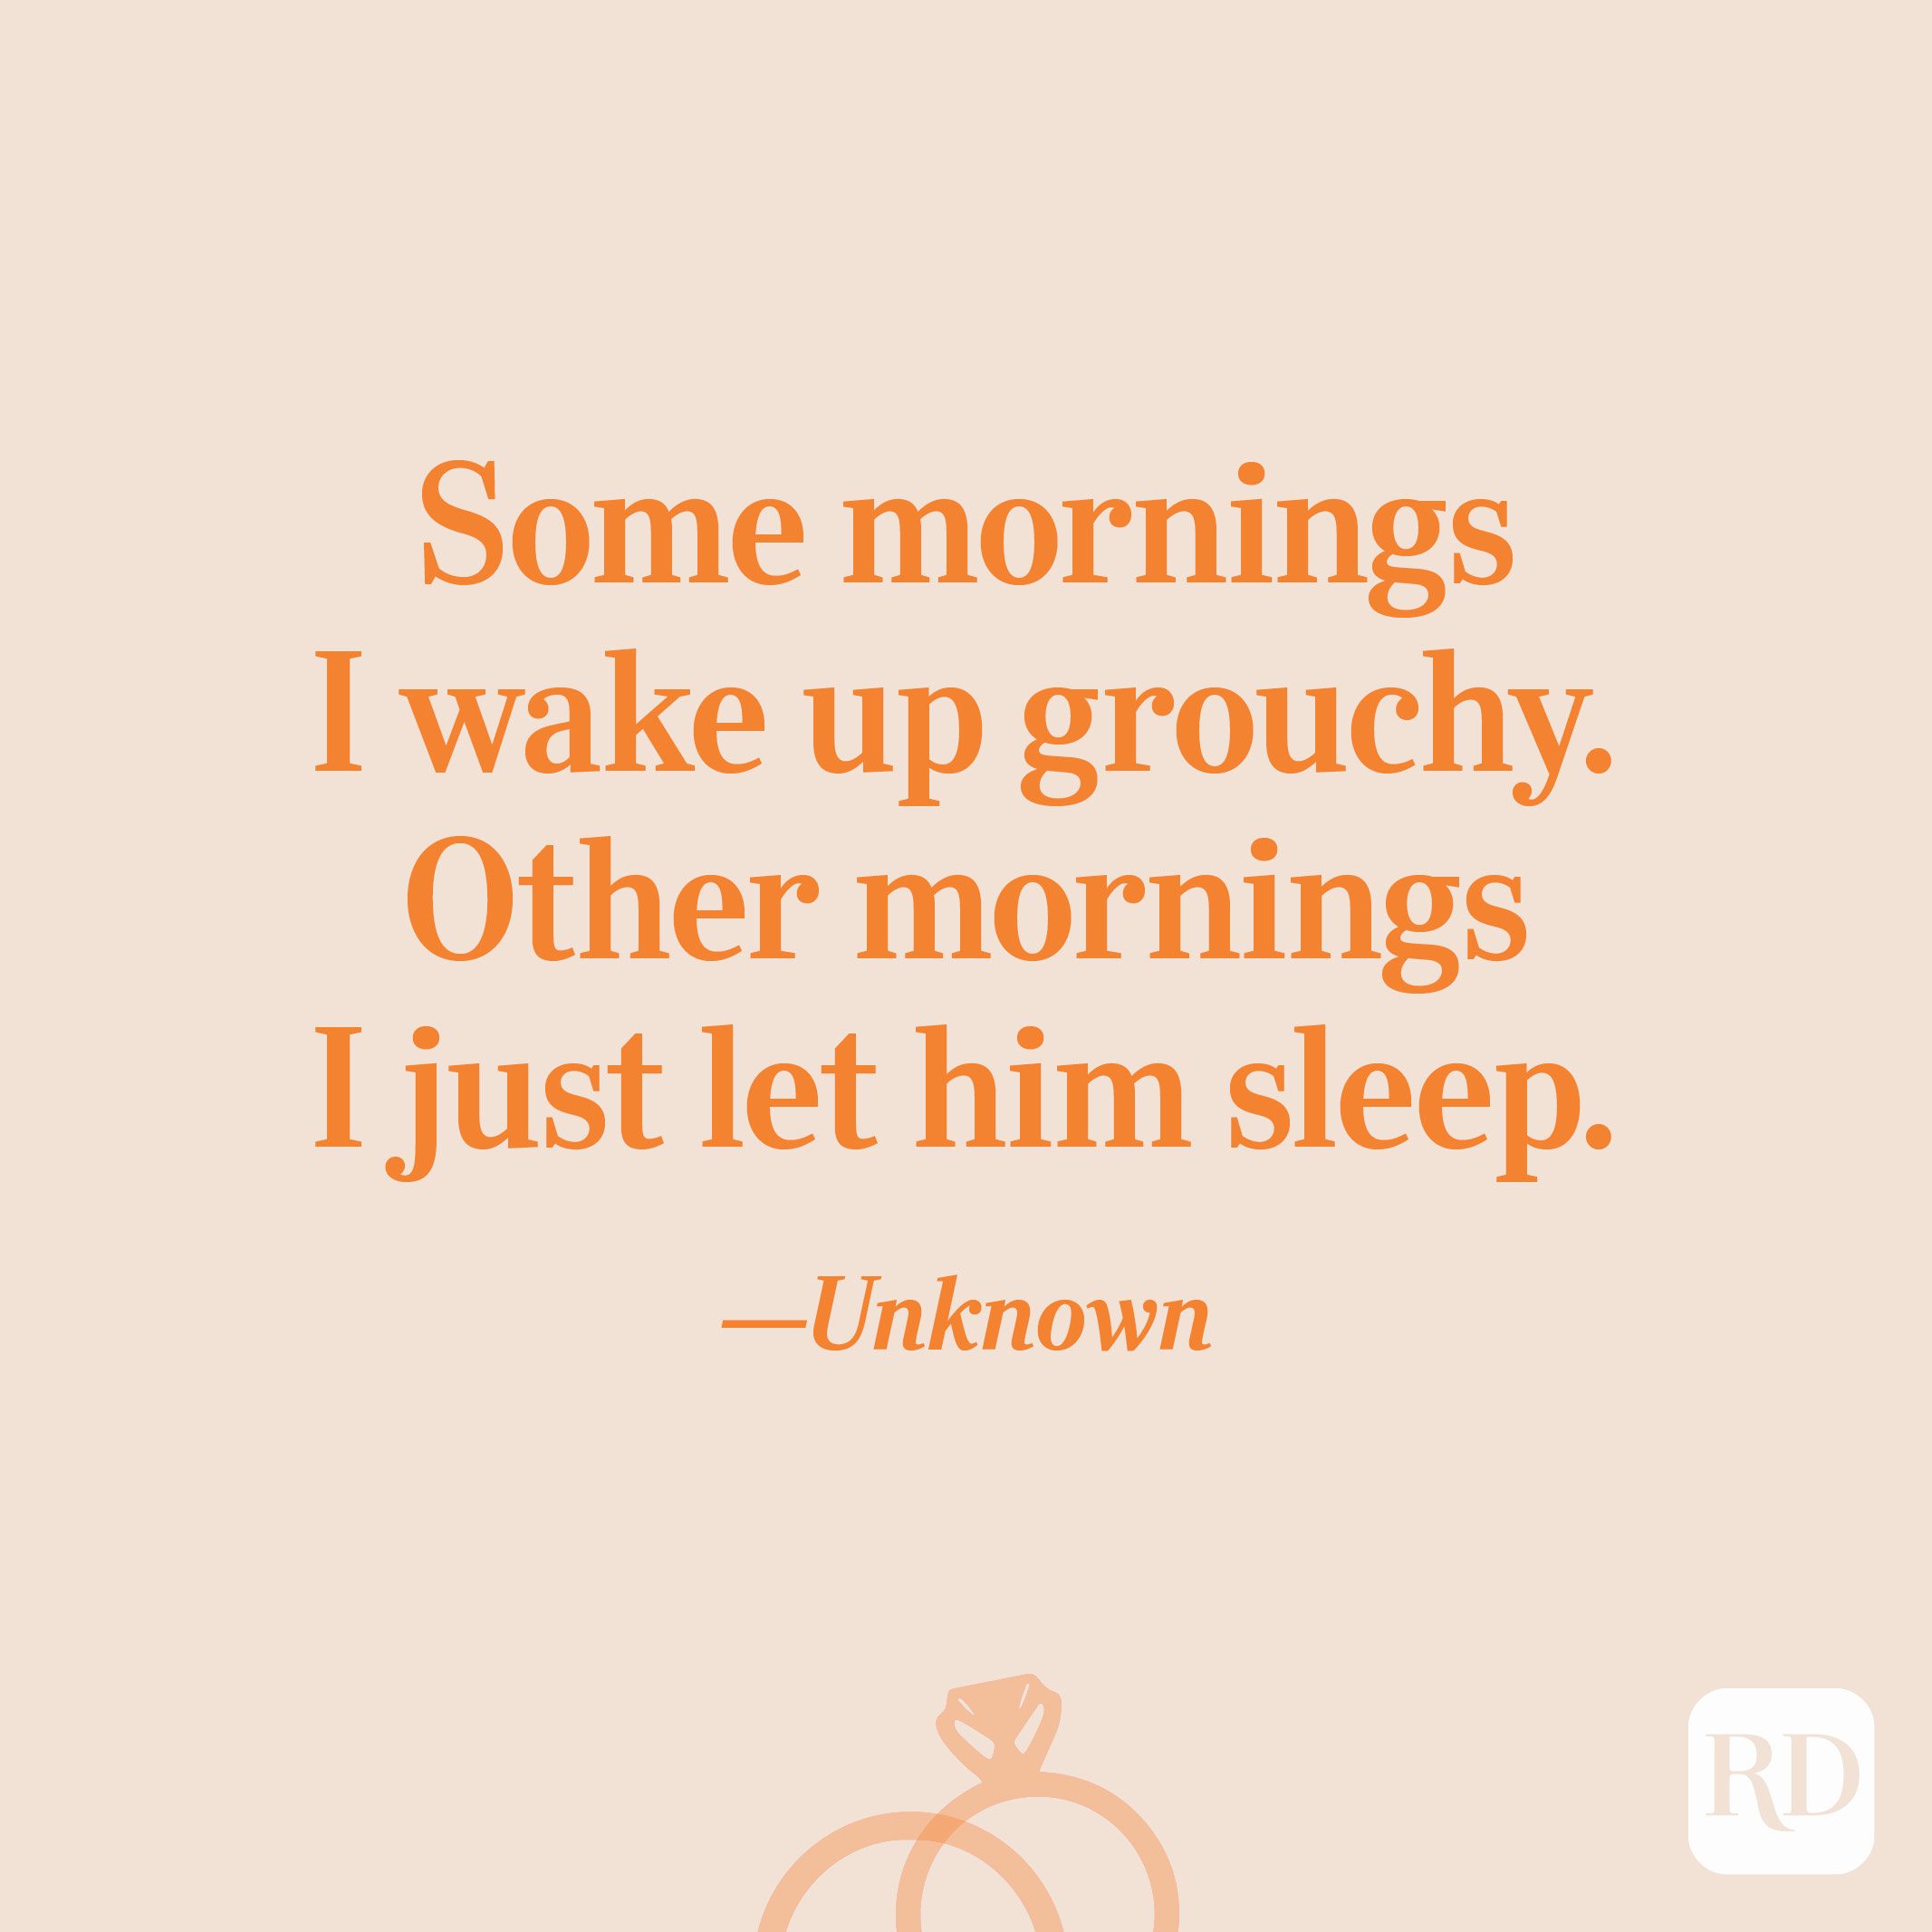 “Some mornings I wake up grouchy. Other mornings I just let him sleep.”—Unknown   